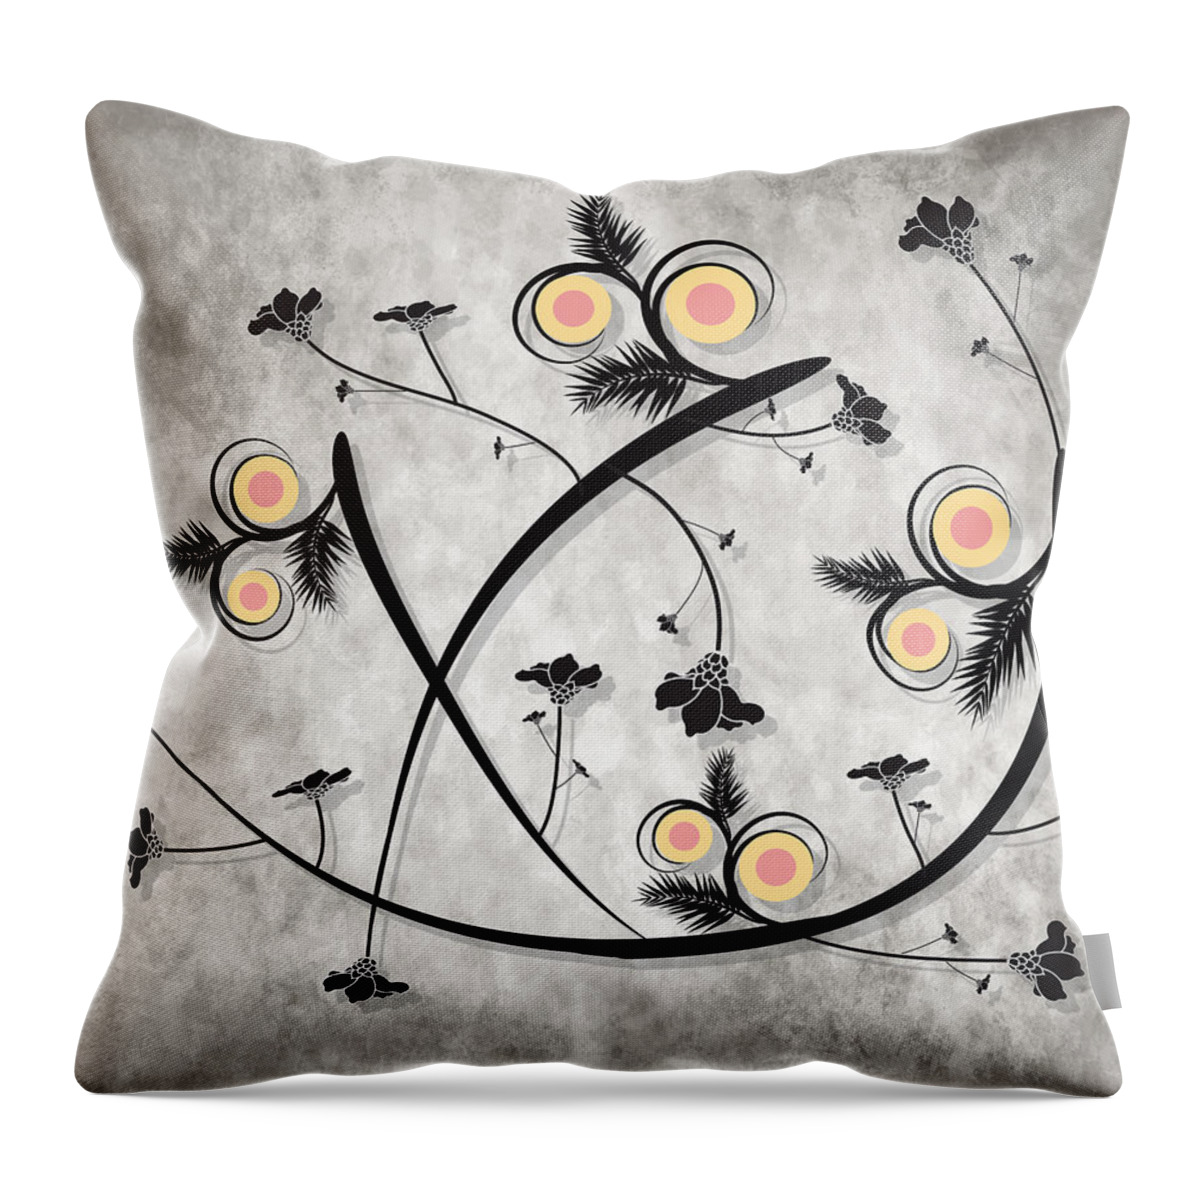 Flower Throw Pillow featuring the digital art Dancing Flowers by Milena Ilieva